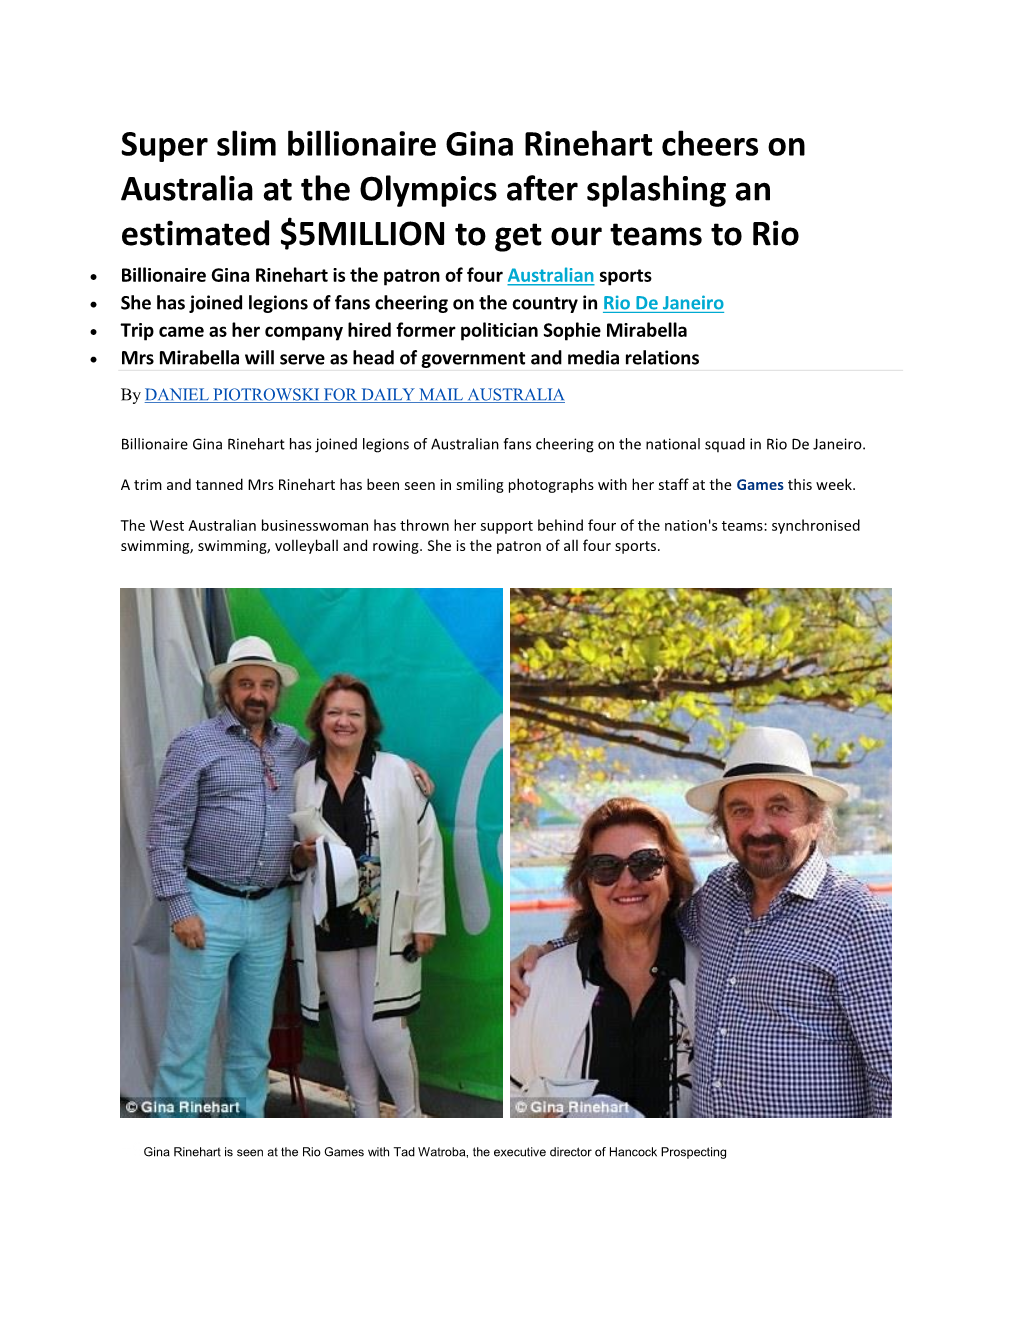 Super Slim Billionaire Gina Rinehart Cheers on Australia at the Olympics After Splashing an Estimated $5MILLION to Get Our Teams